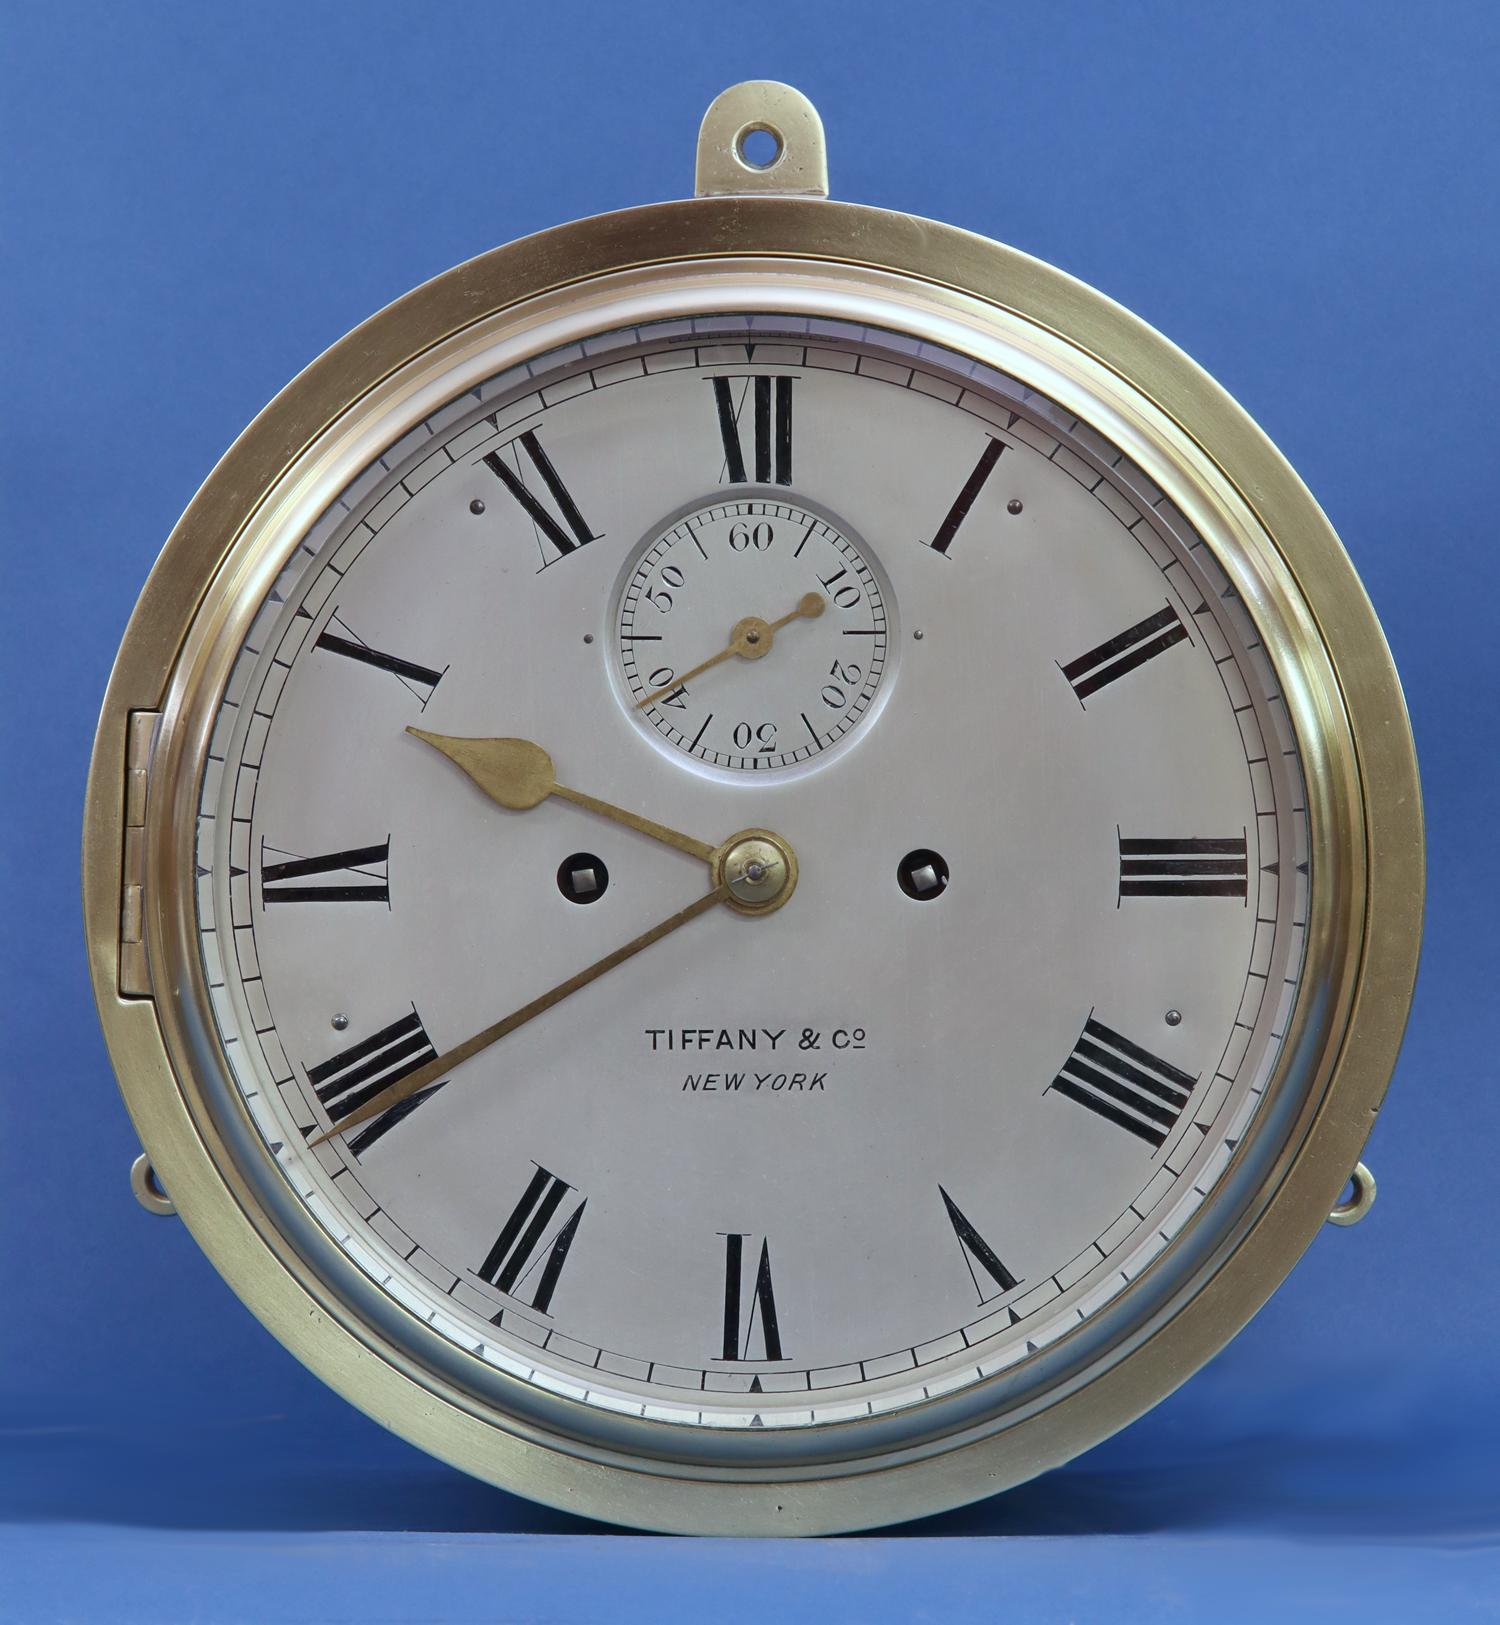 
Makers:	
J.C. Jennens, London.
Retailed by Tiffany & Co, New York.

Description:	
A late-19th century bronze bulkhead clock with ship’s striking including the dog’s watch originally retailed by Tiffany & Co, New York.

Case:	
The circular case has